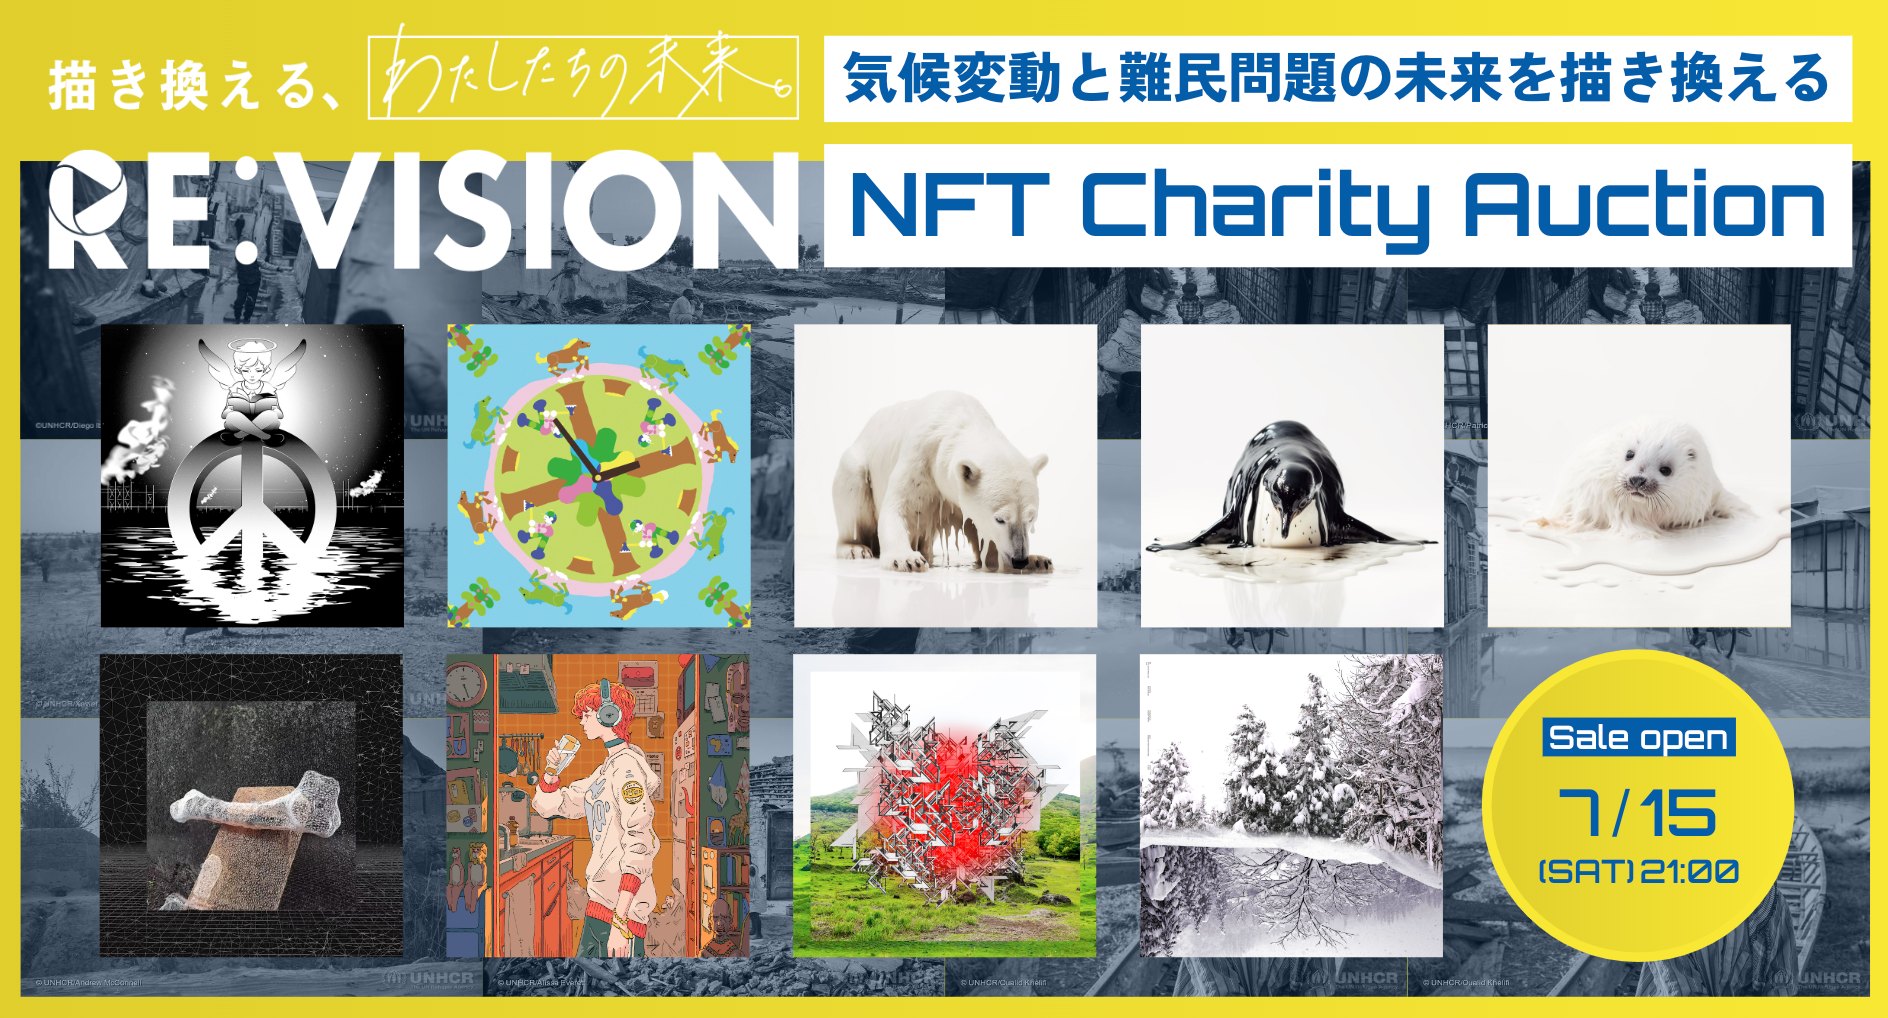 【7/15(SAT)21:00-9/3(SUN)21:00】気候変動と難民問題の未来を描き換える NFT Charity Art Auction vol.2 with mosaic nation